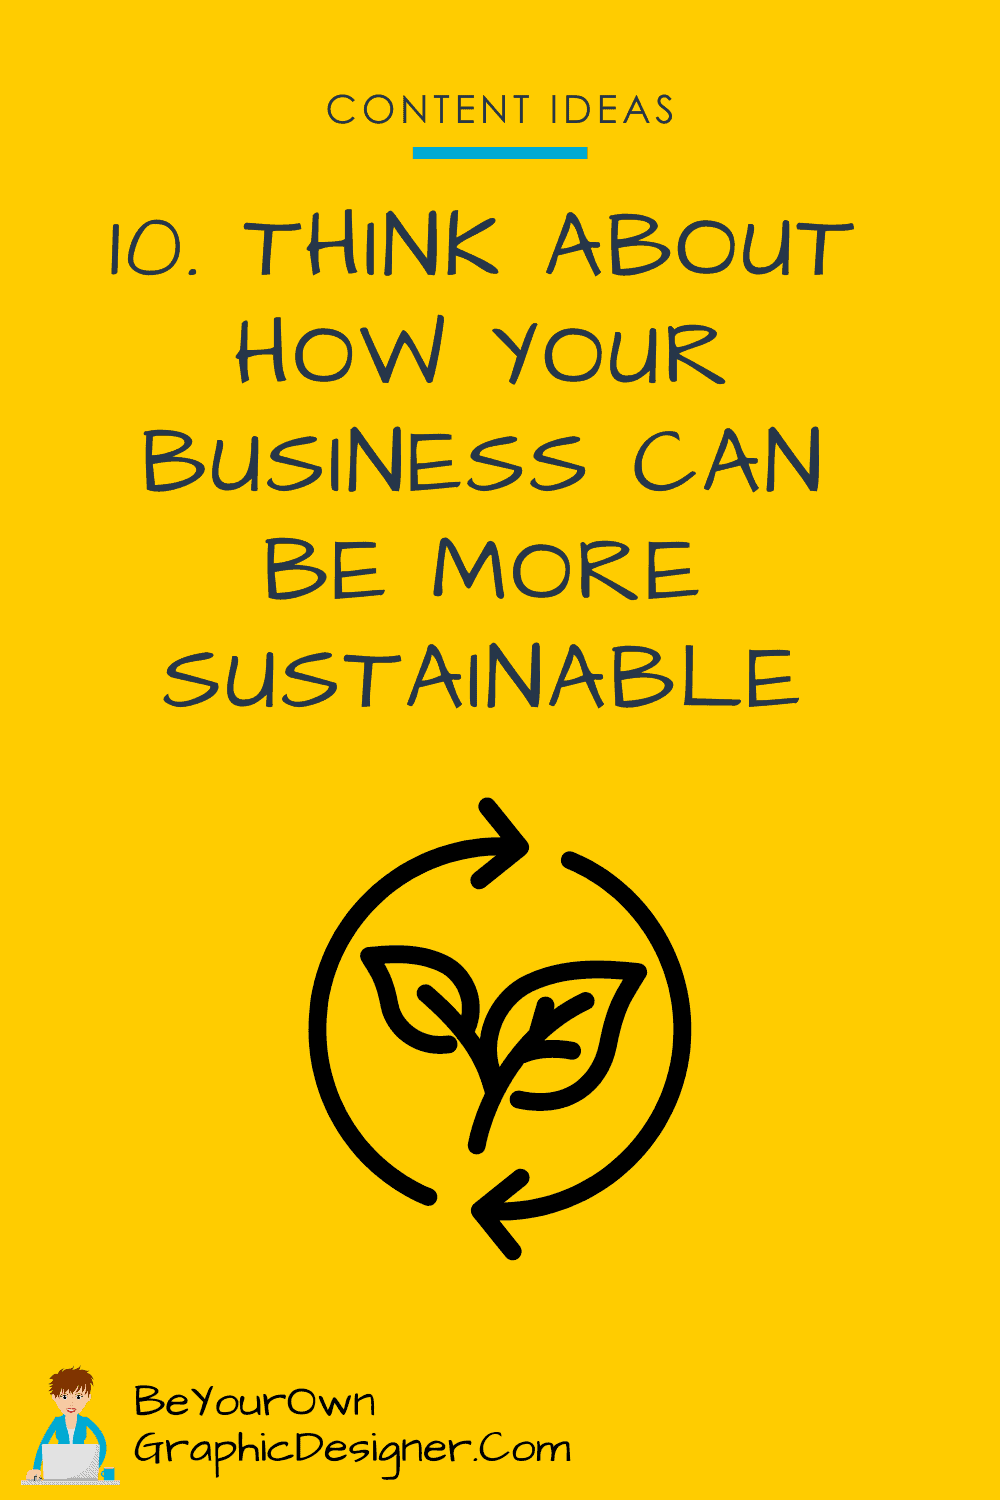 Think about how your business can be more Sustainable